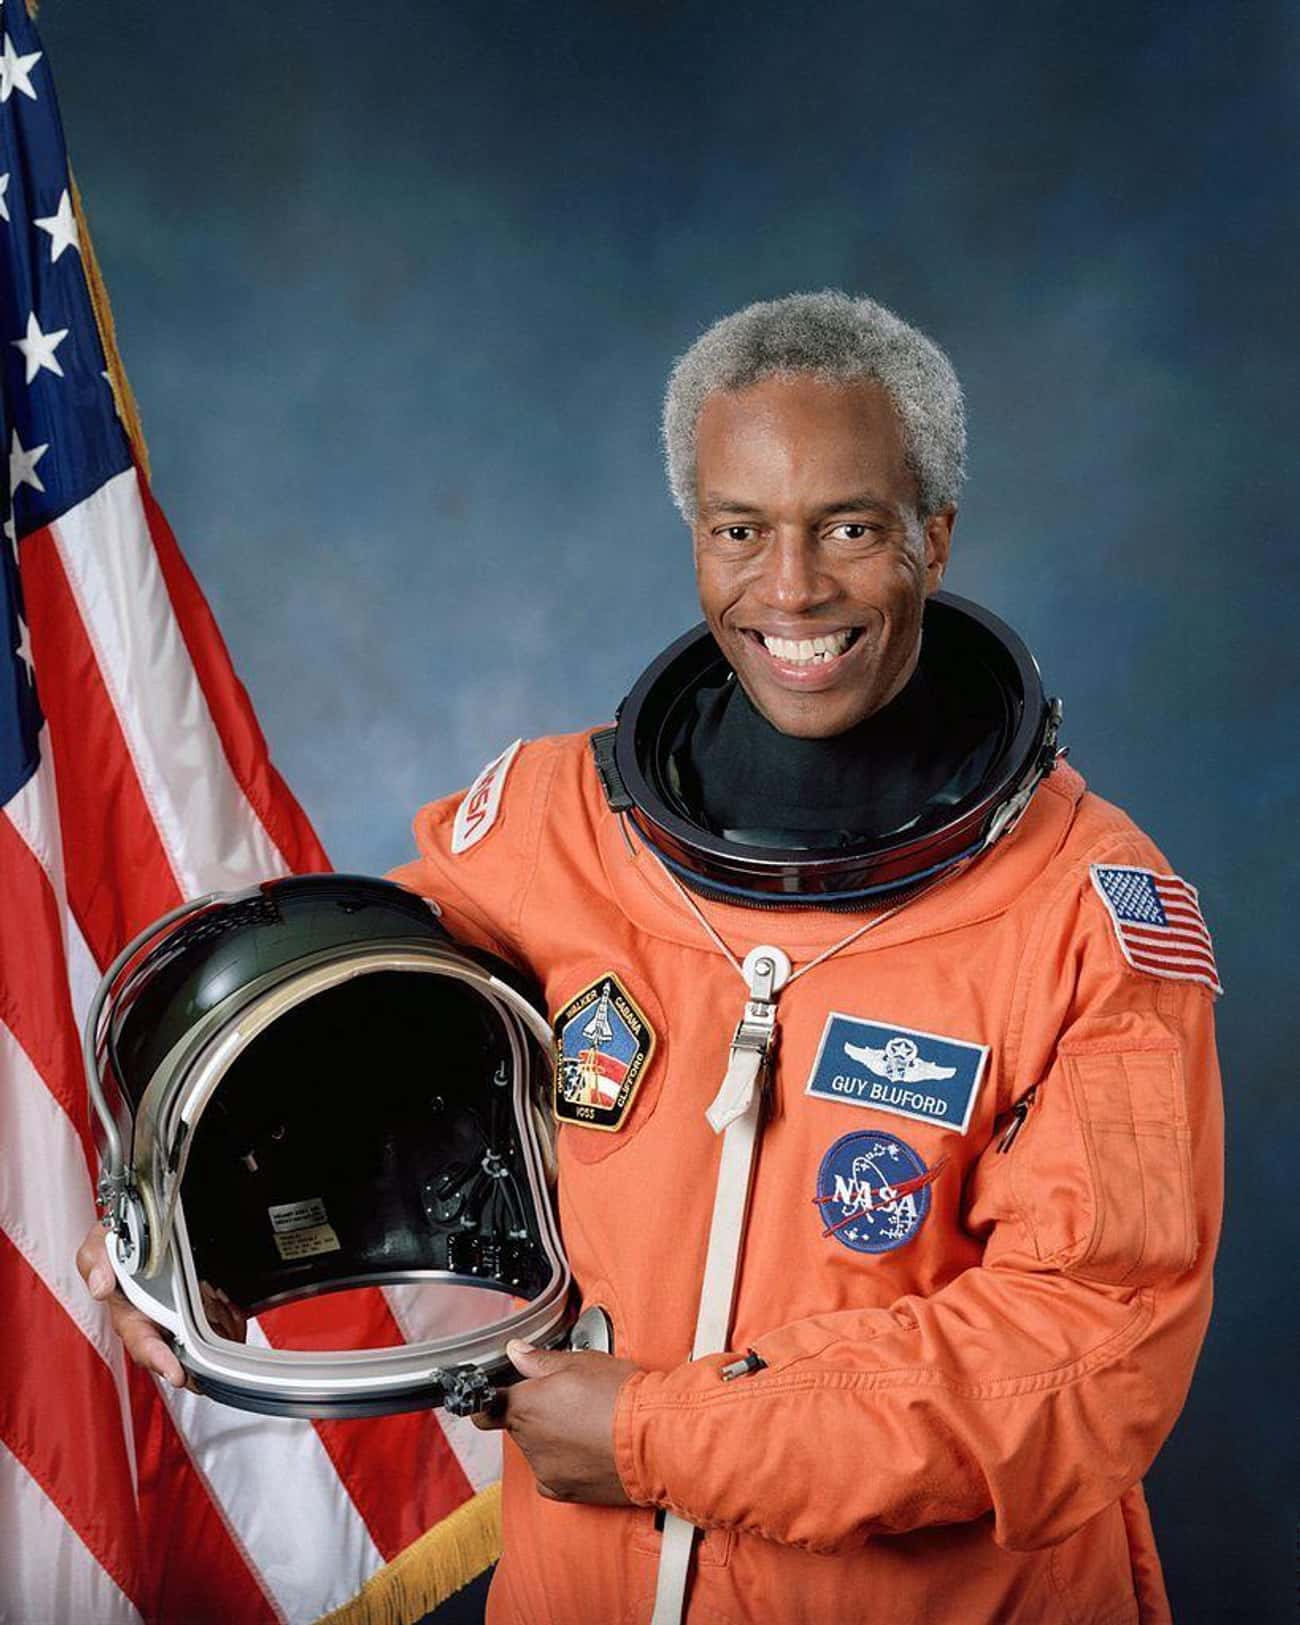 1983 - The First African American in Space